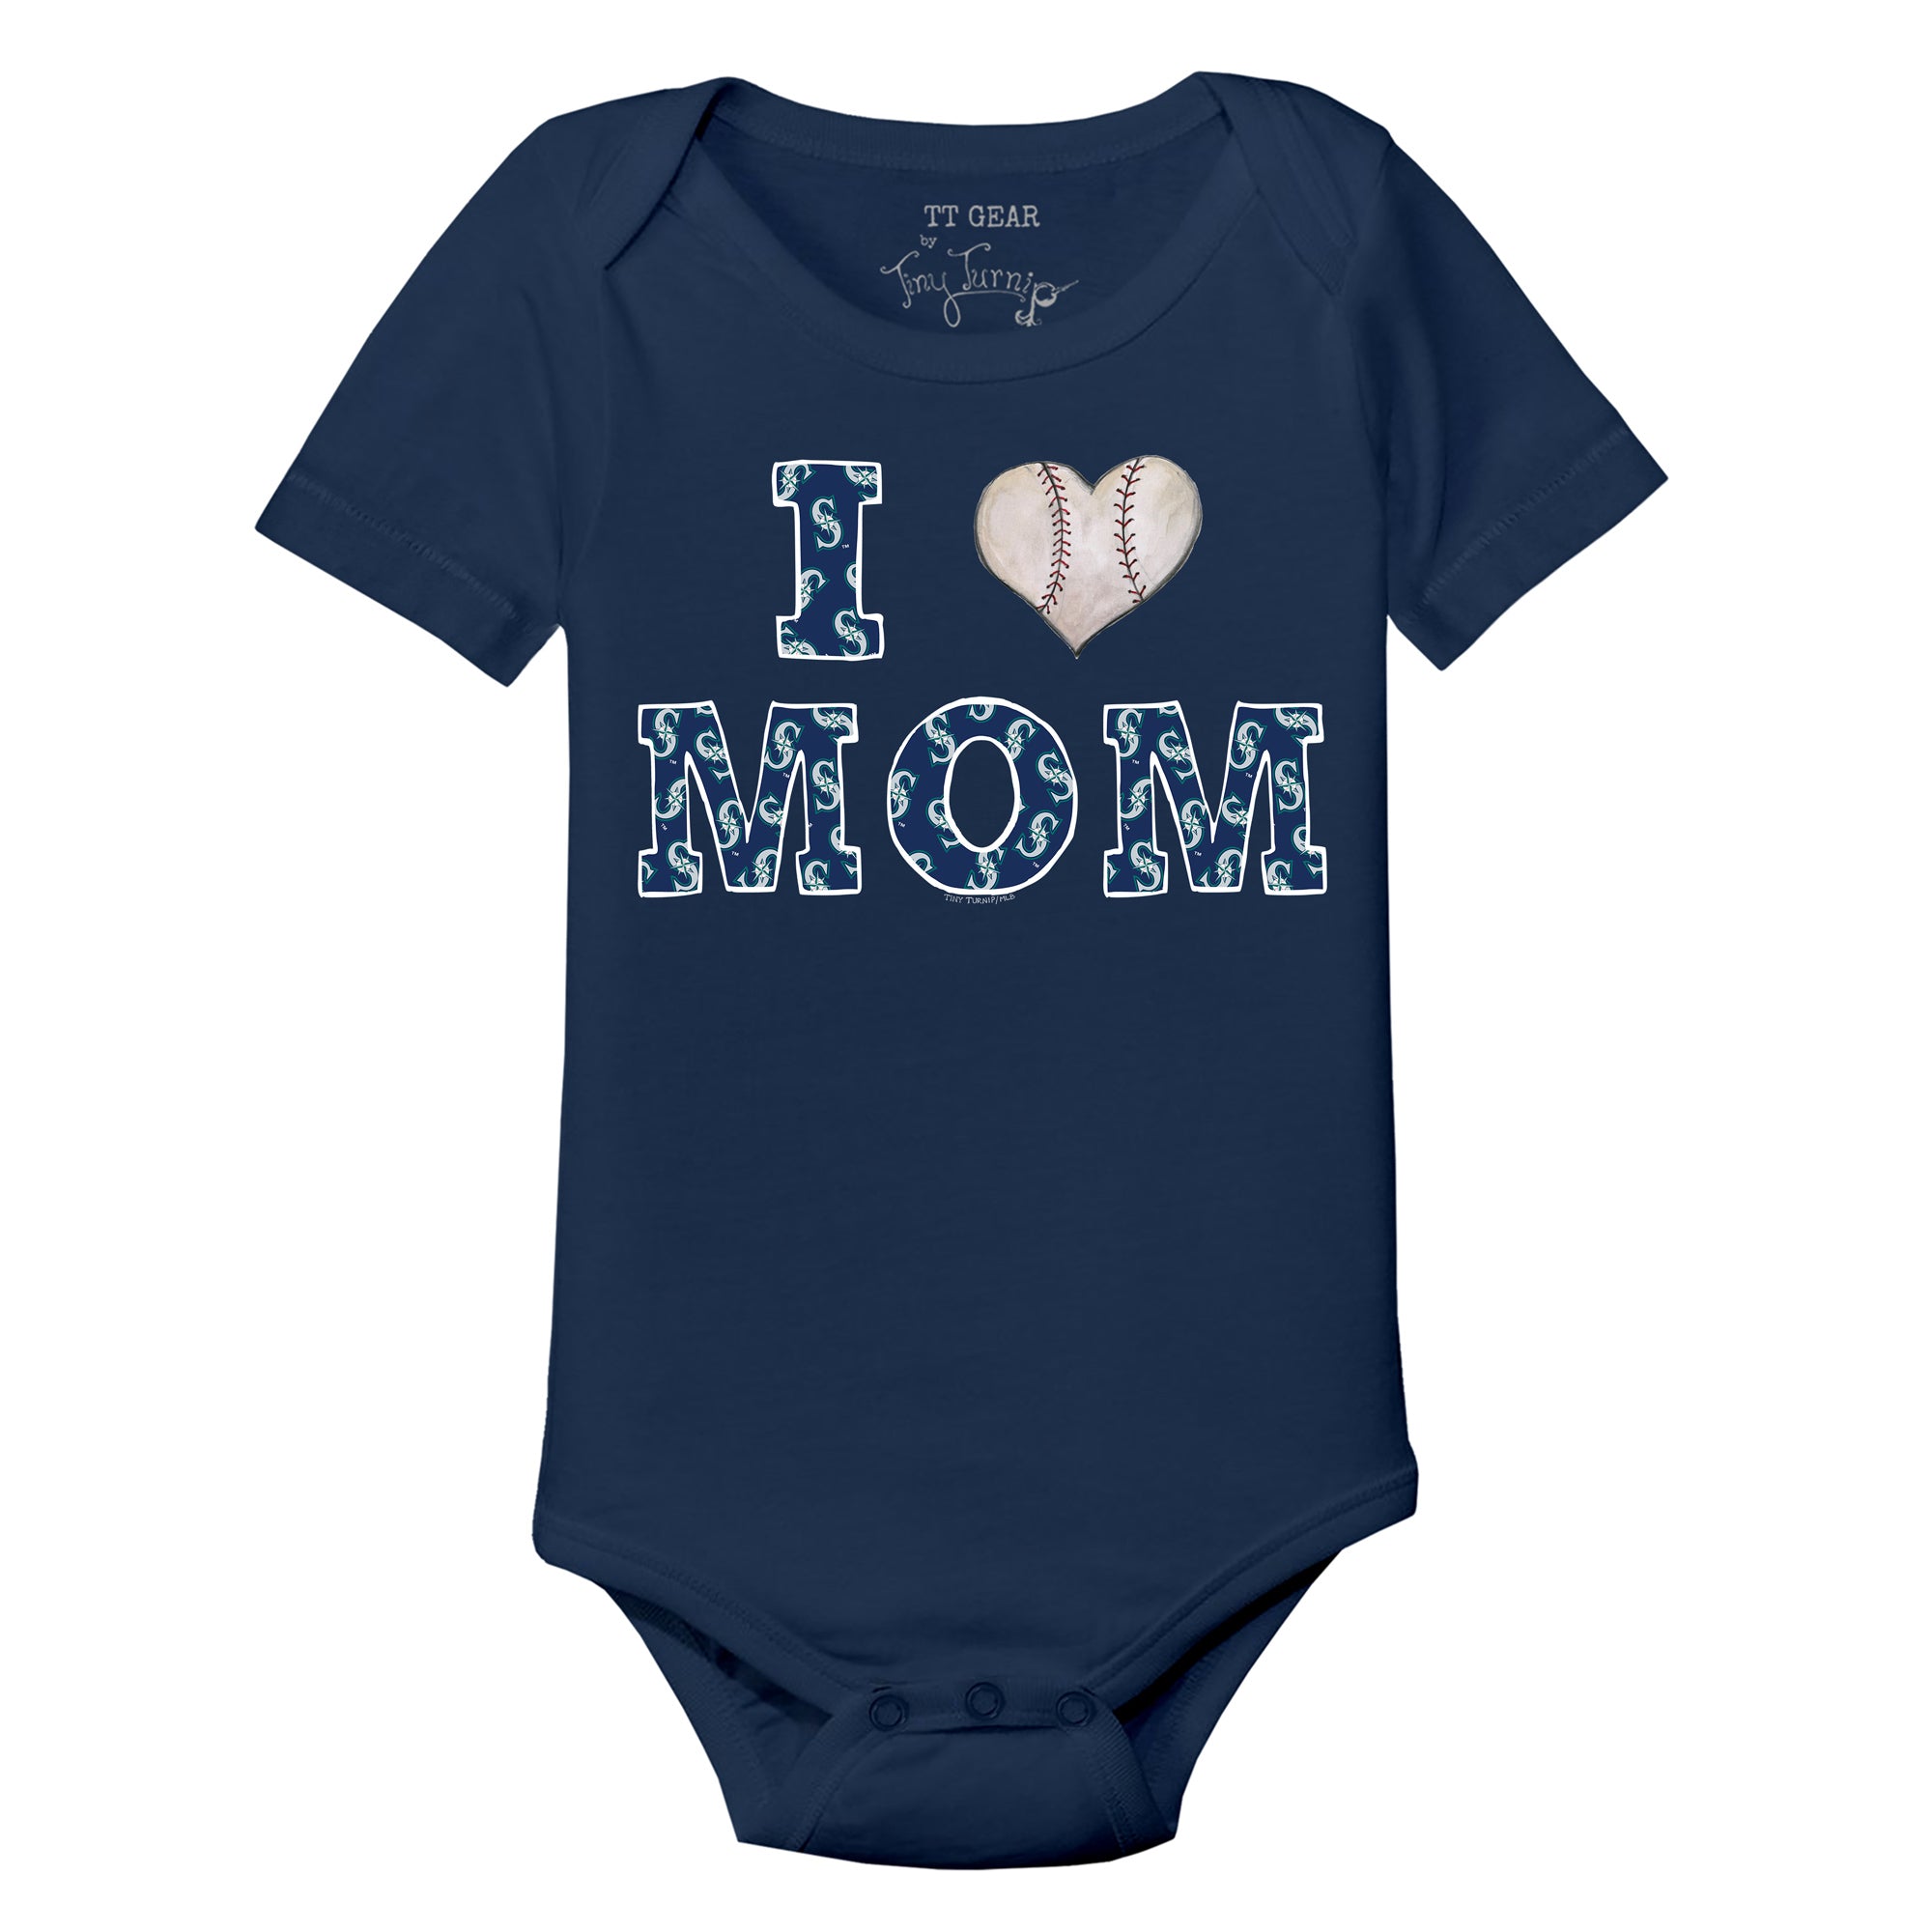 Seattle Mariners Baby Apparel, Mariners Infant Jerseys, Toddler Apparel